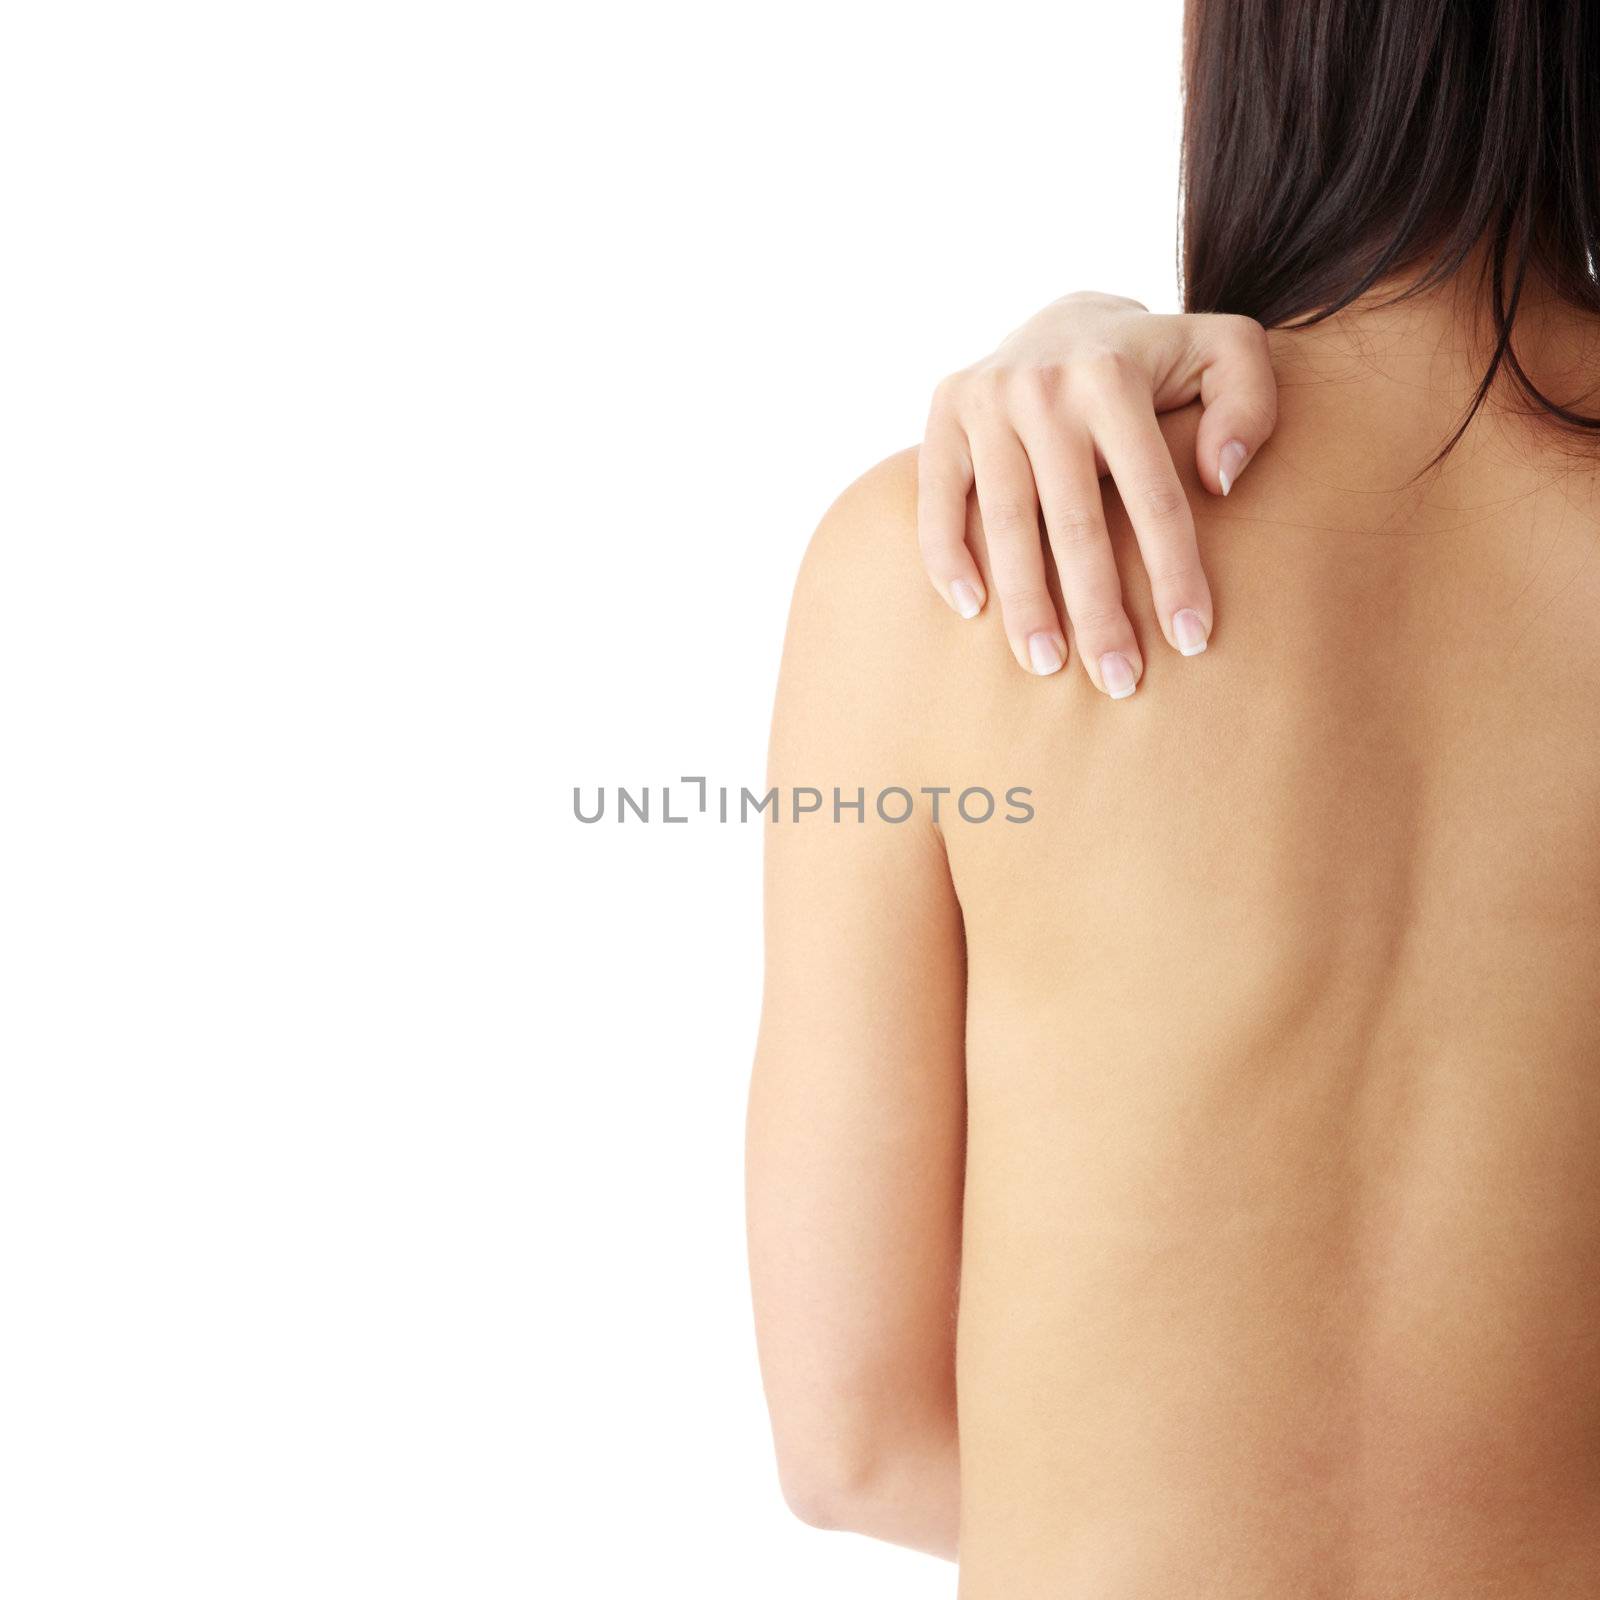 Nude woman from behind. Back pain concept. Isolated